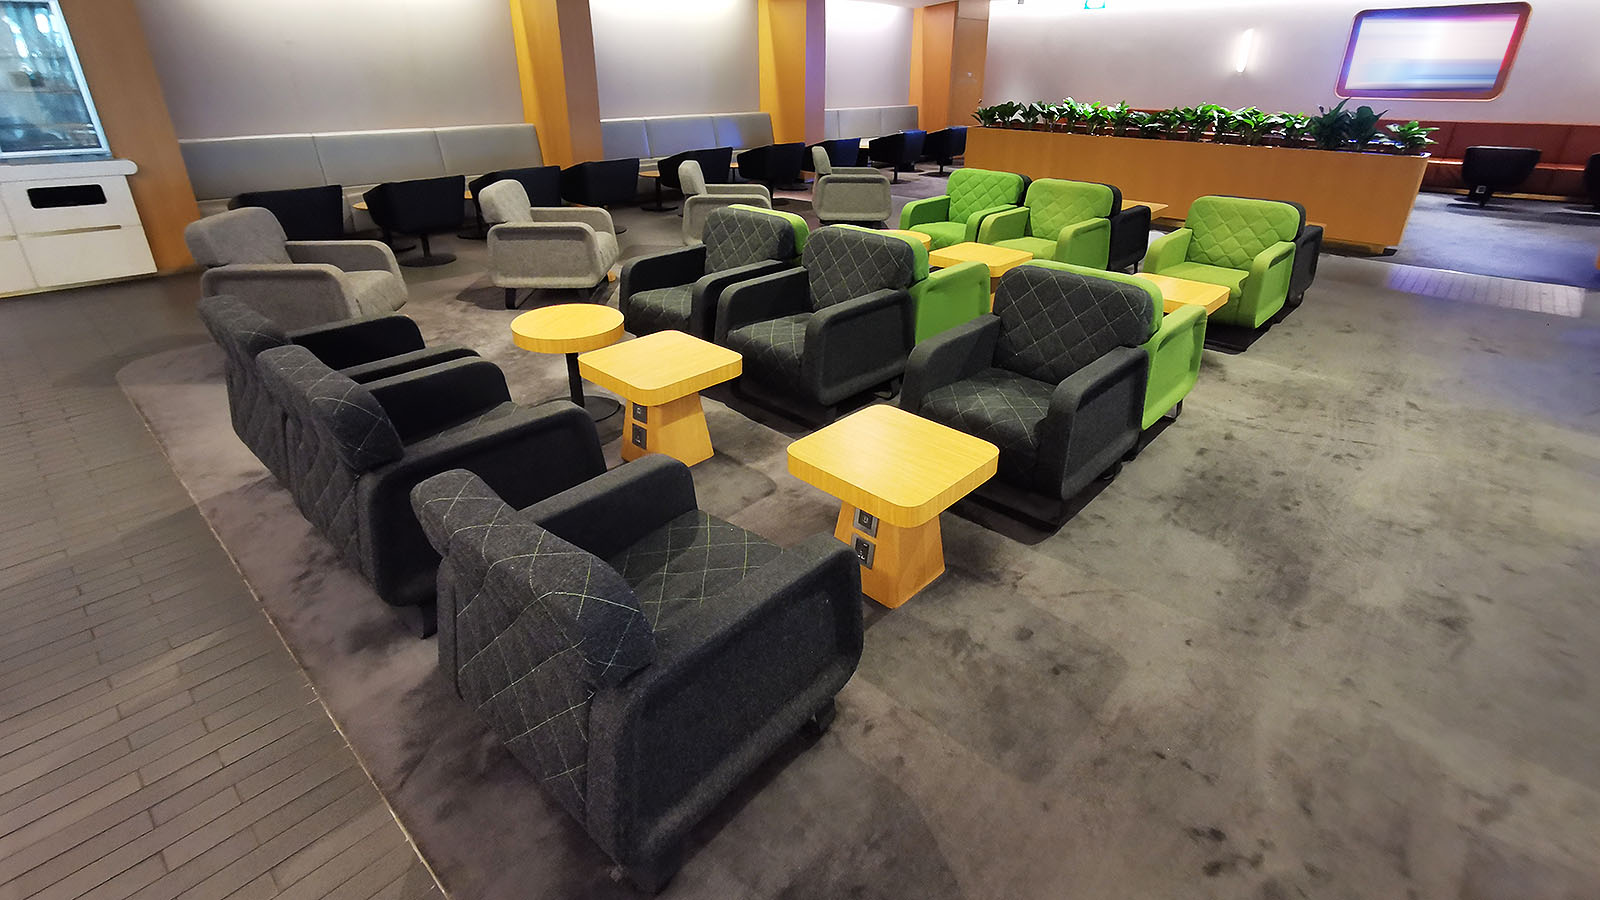 Green, black and grey coloured seats at the Qantas International Business Lounge in Singapore